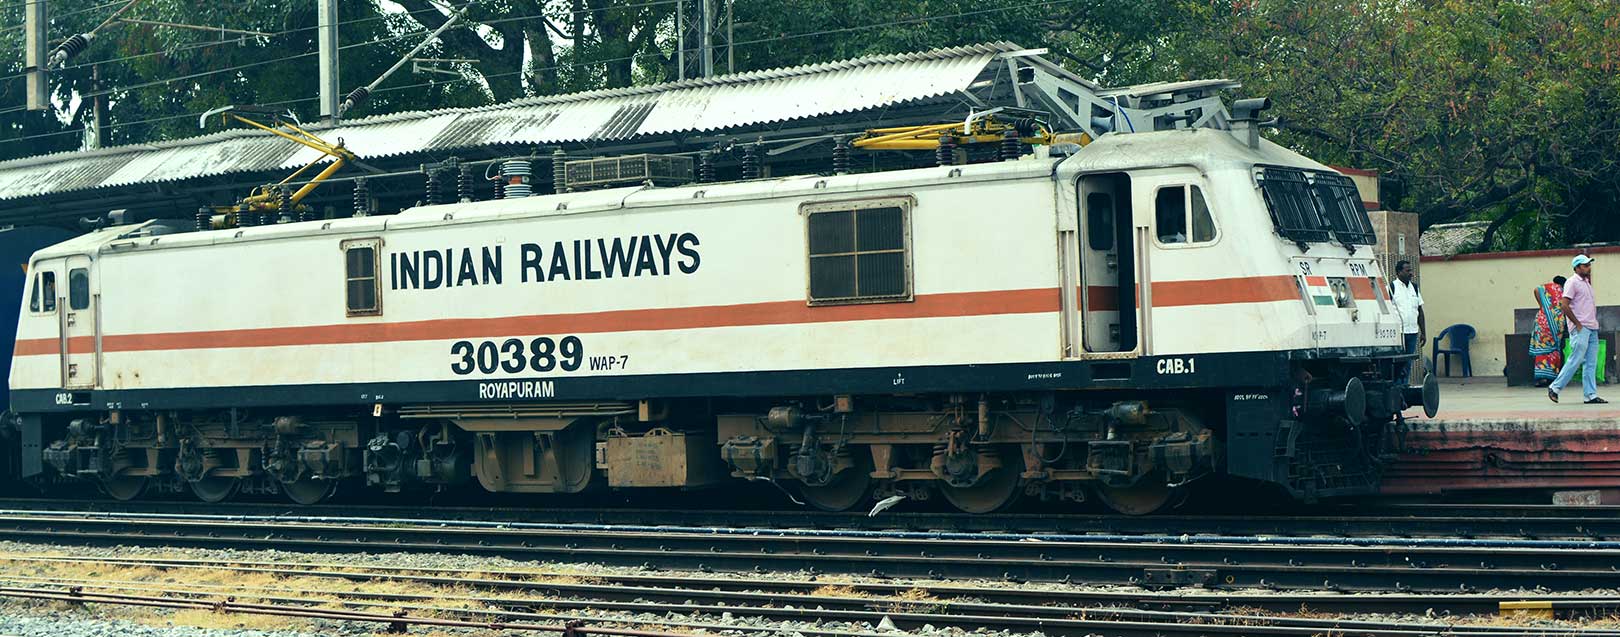 Indian Railways bags Rs.680 cr export order from Sri Lanka